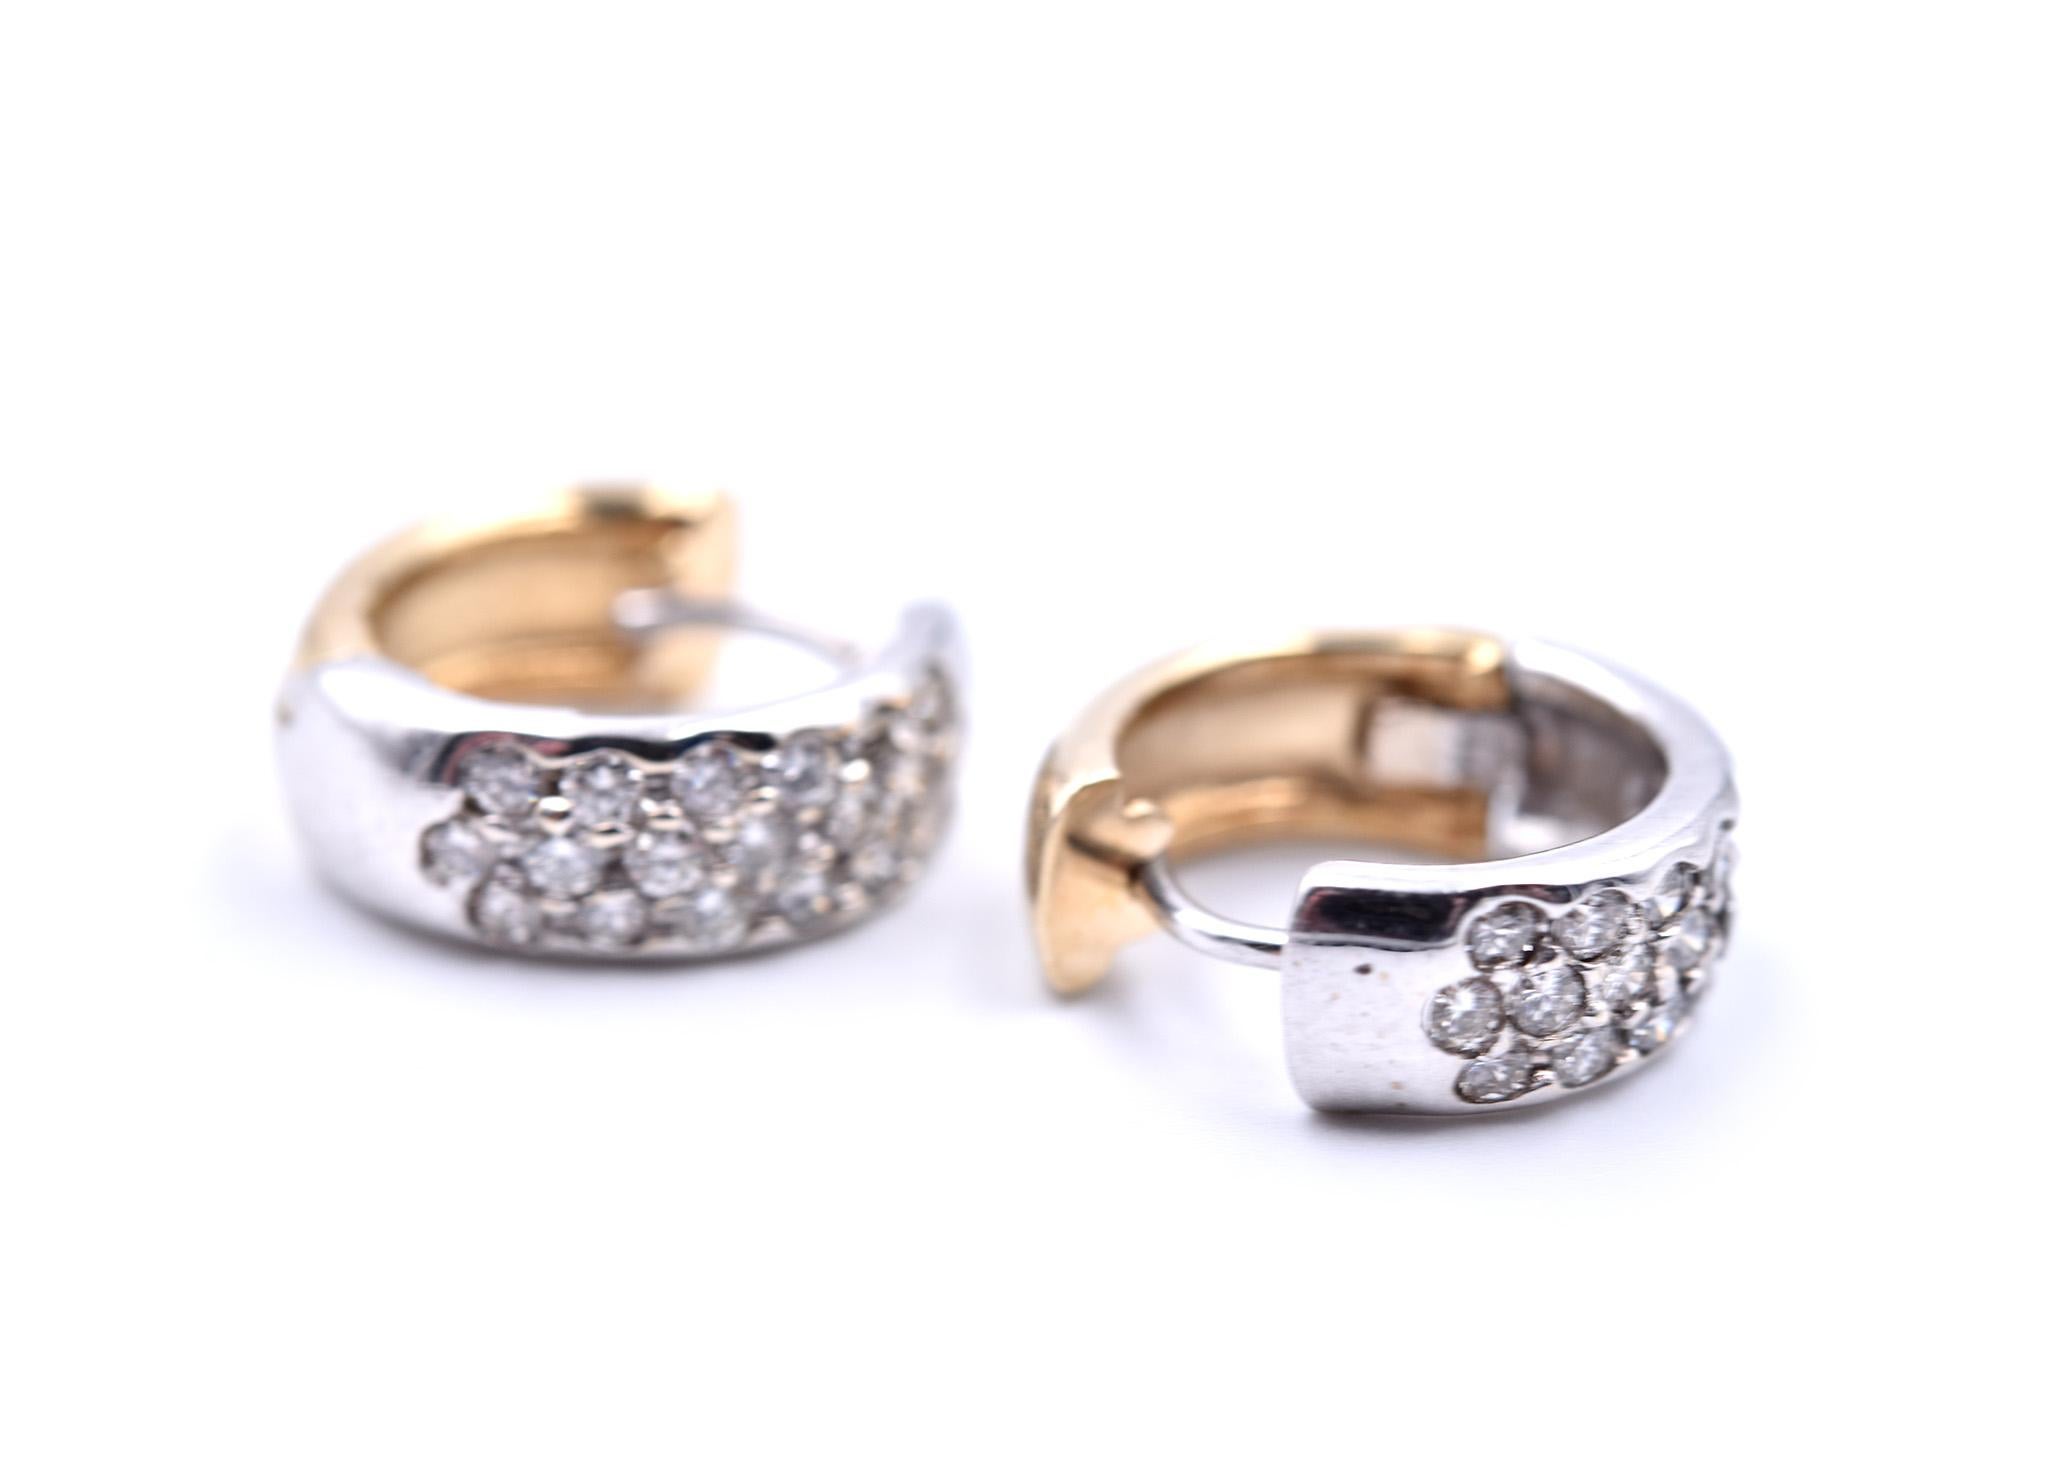 Designer: custom design
Material: 14k yellow and white
Diamonds: 38 round brilliant = .75cttw
Color: H
Clarity: SI1
Dimensions: earrings are approximately 19.73mm by 5.72mm
Fastenings: post 
Weight: 6.61 grams
